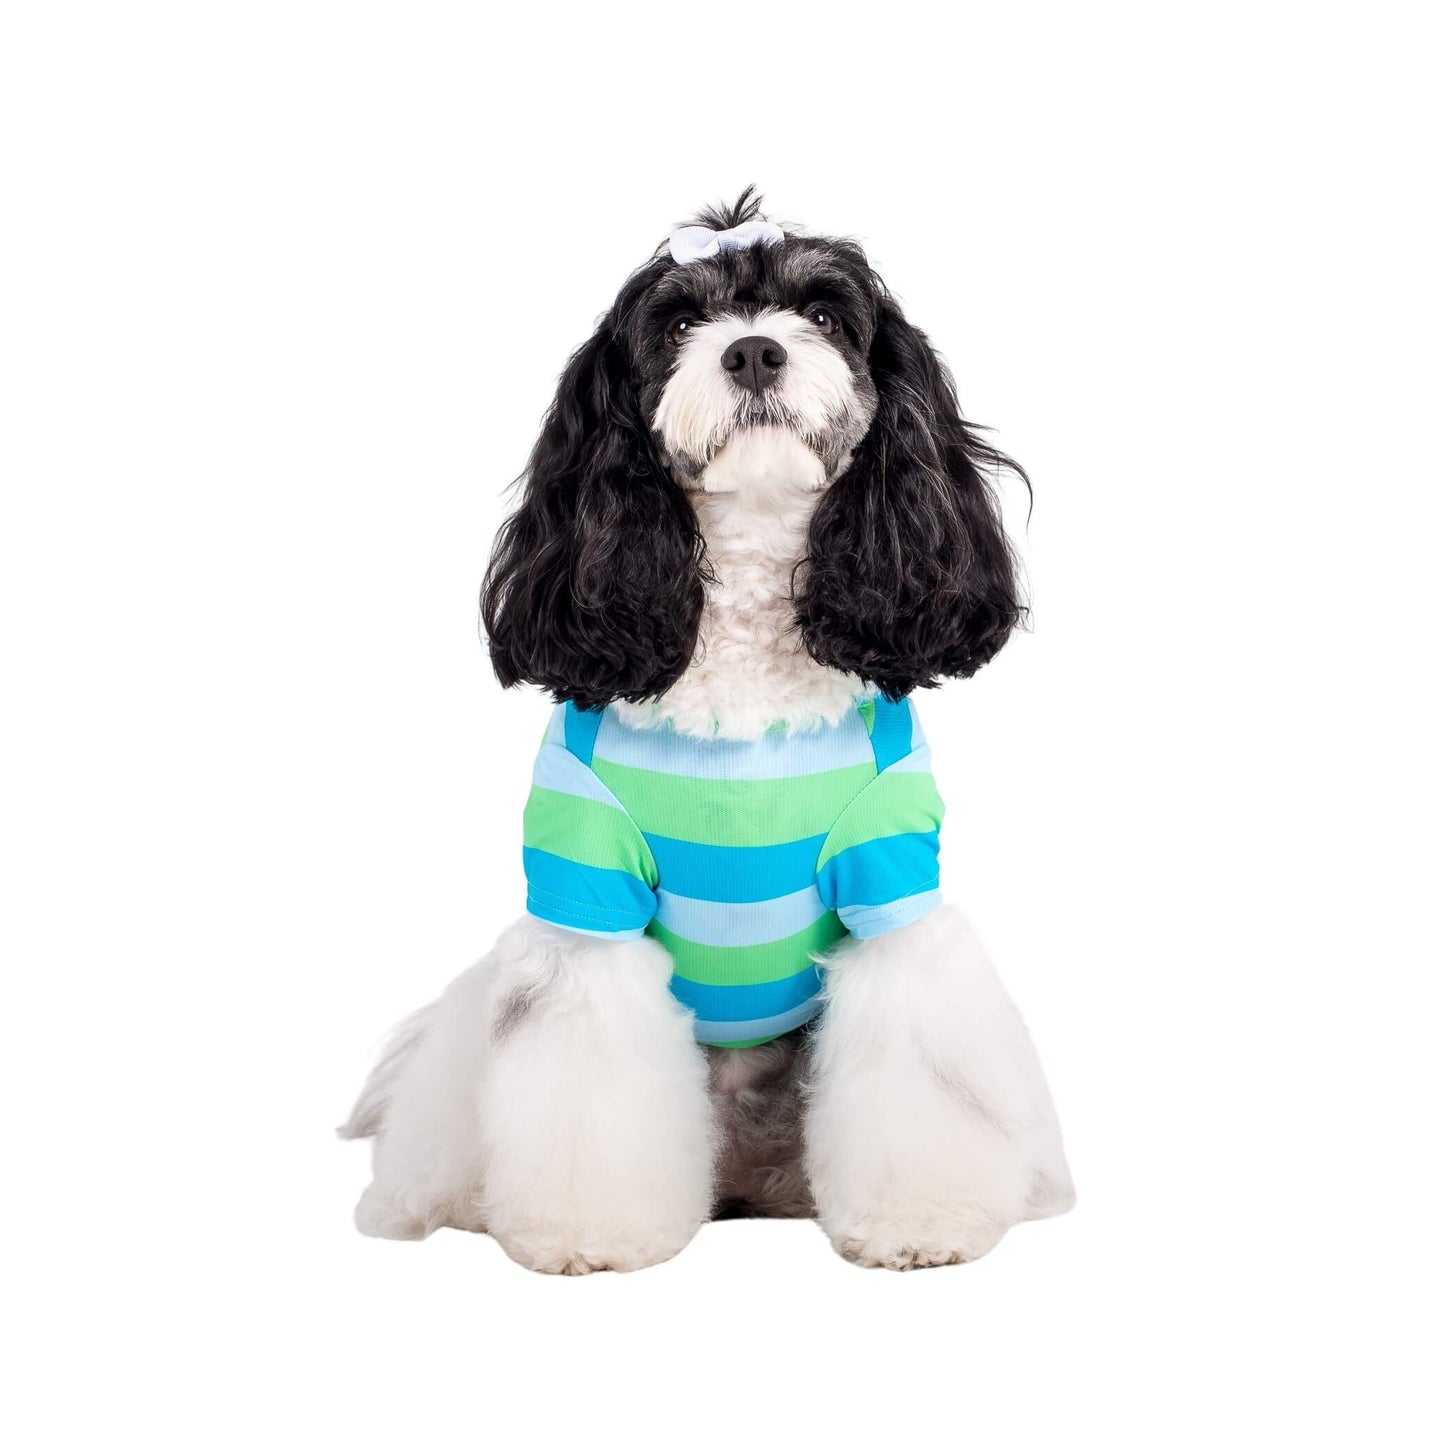 A black and white Cavoodle wearing a blue and green dog cooling shirt.